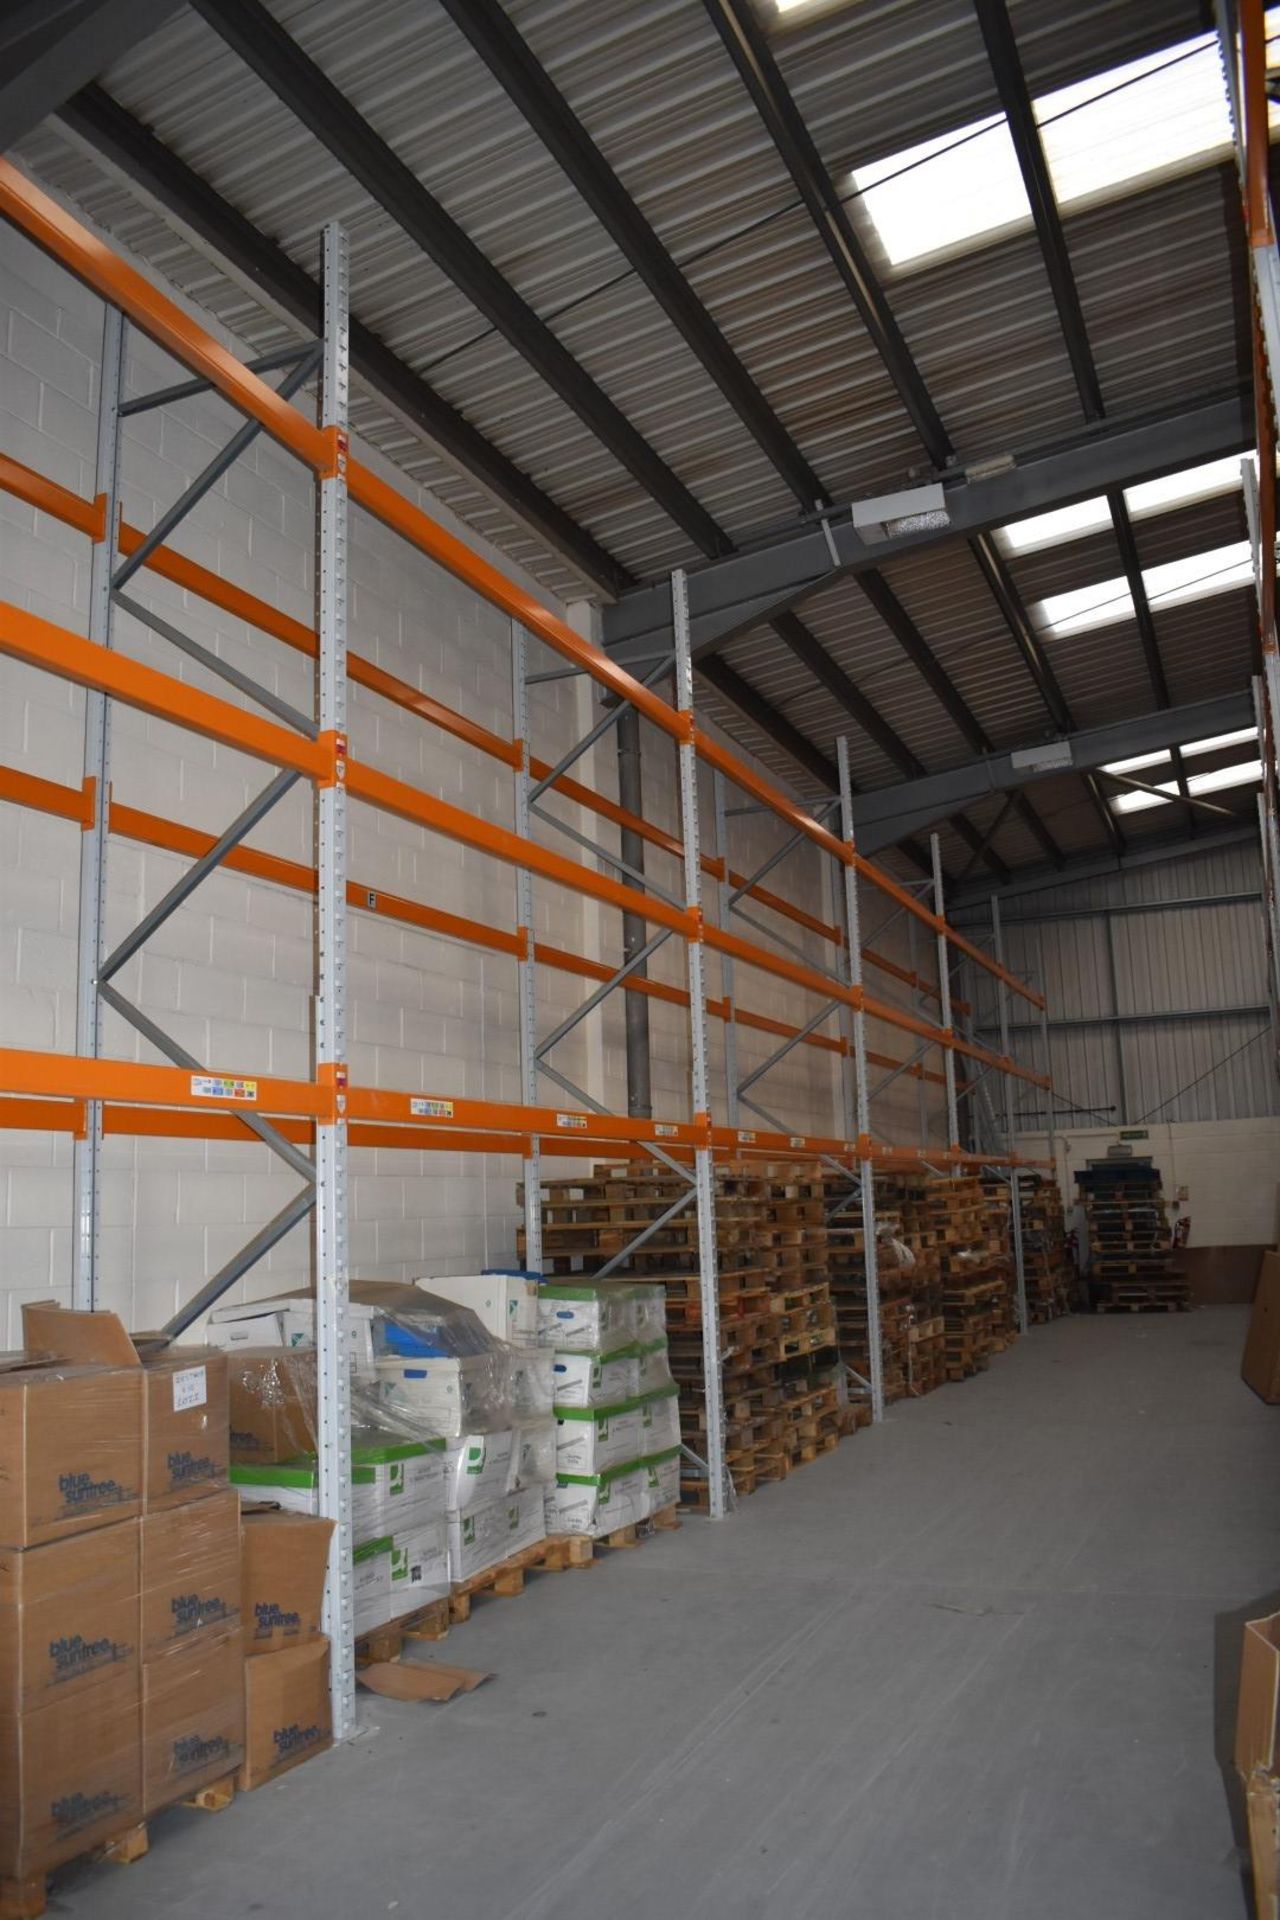 9 x Bays of Apex Pallet Racking - Includes 10 x Apex 16 UK 16,000kg Capacity Uprights and 60 x - Image 4 of 19